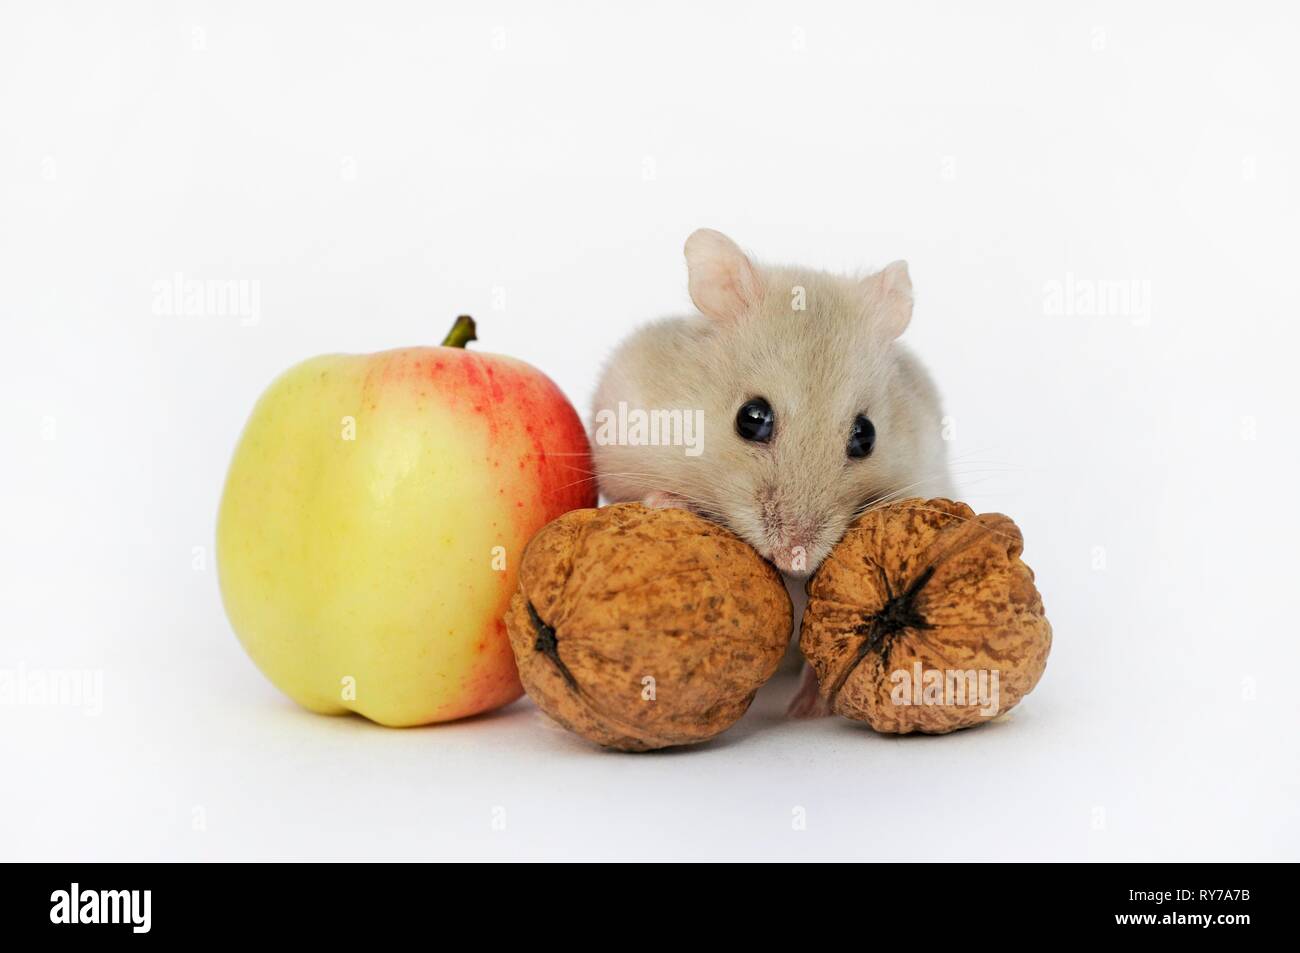 Dsungarian dwarf hamster, sapphire, sits between nuts and apple, Austria Stock Photo